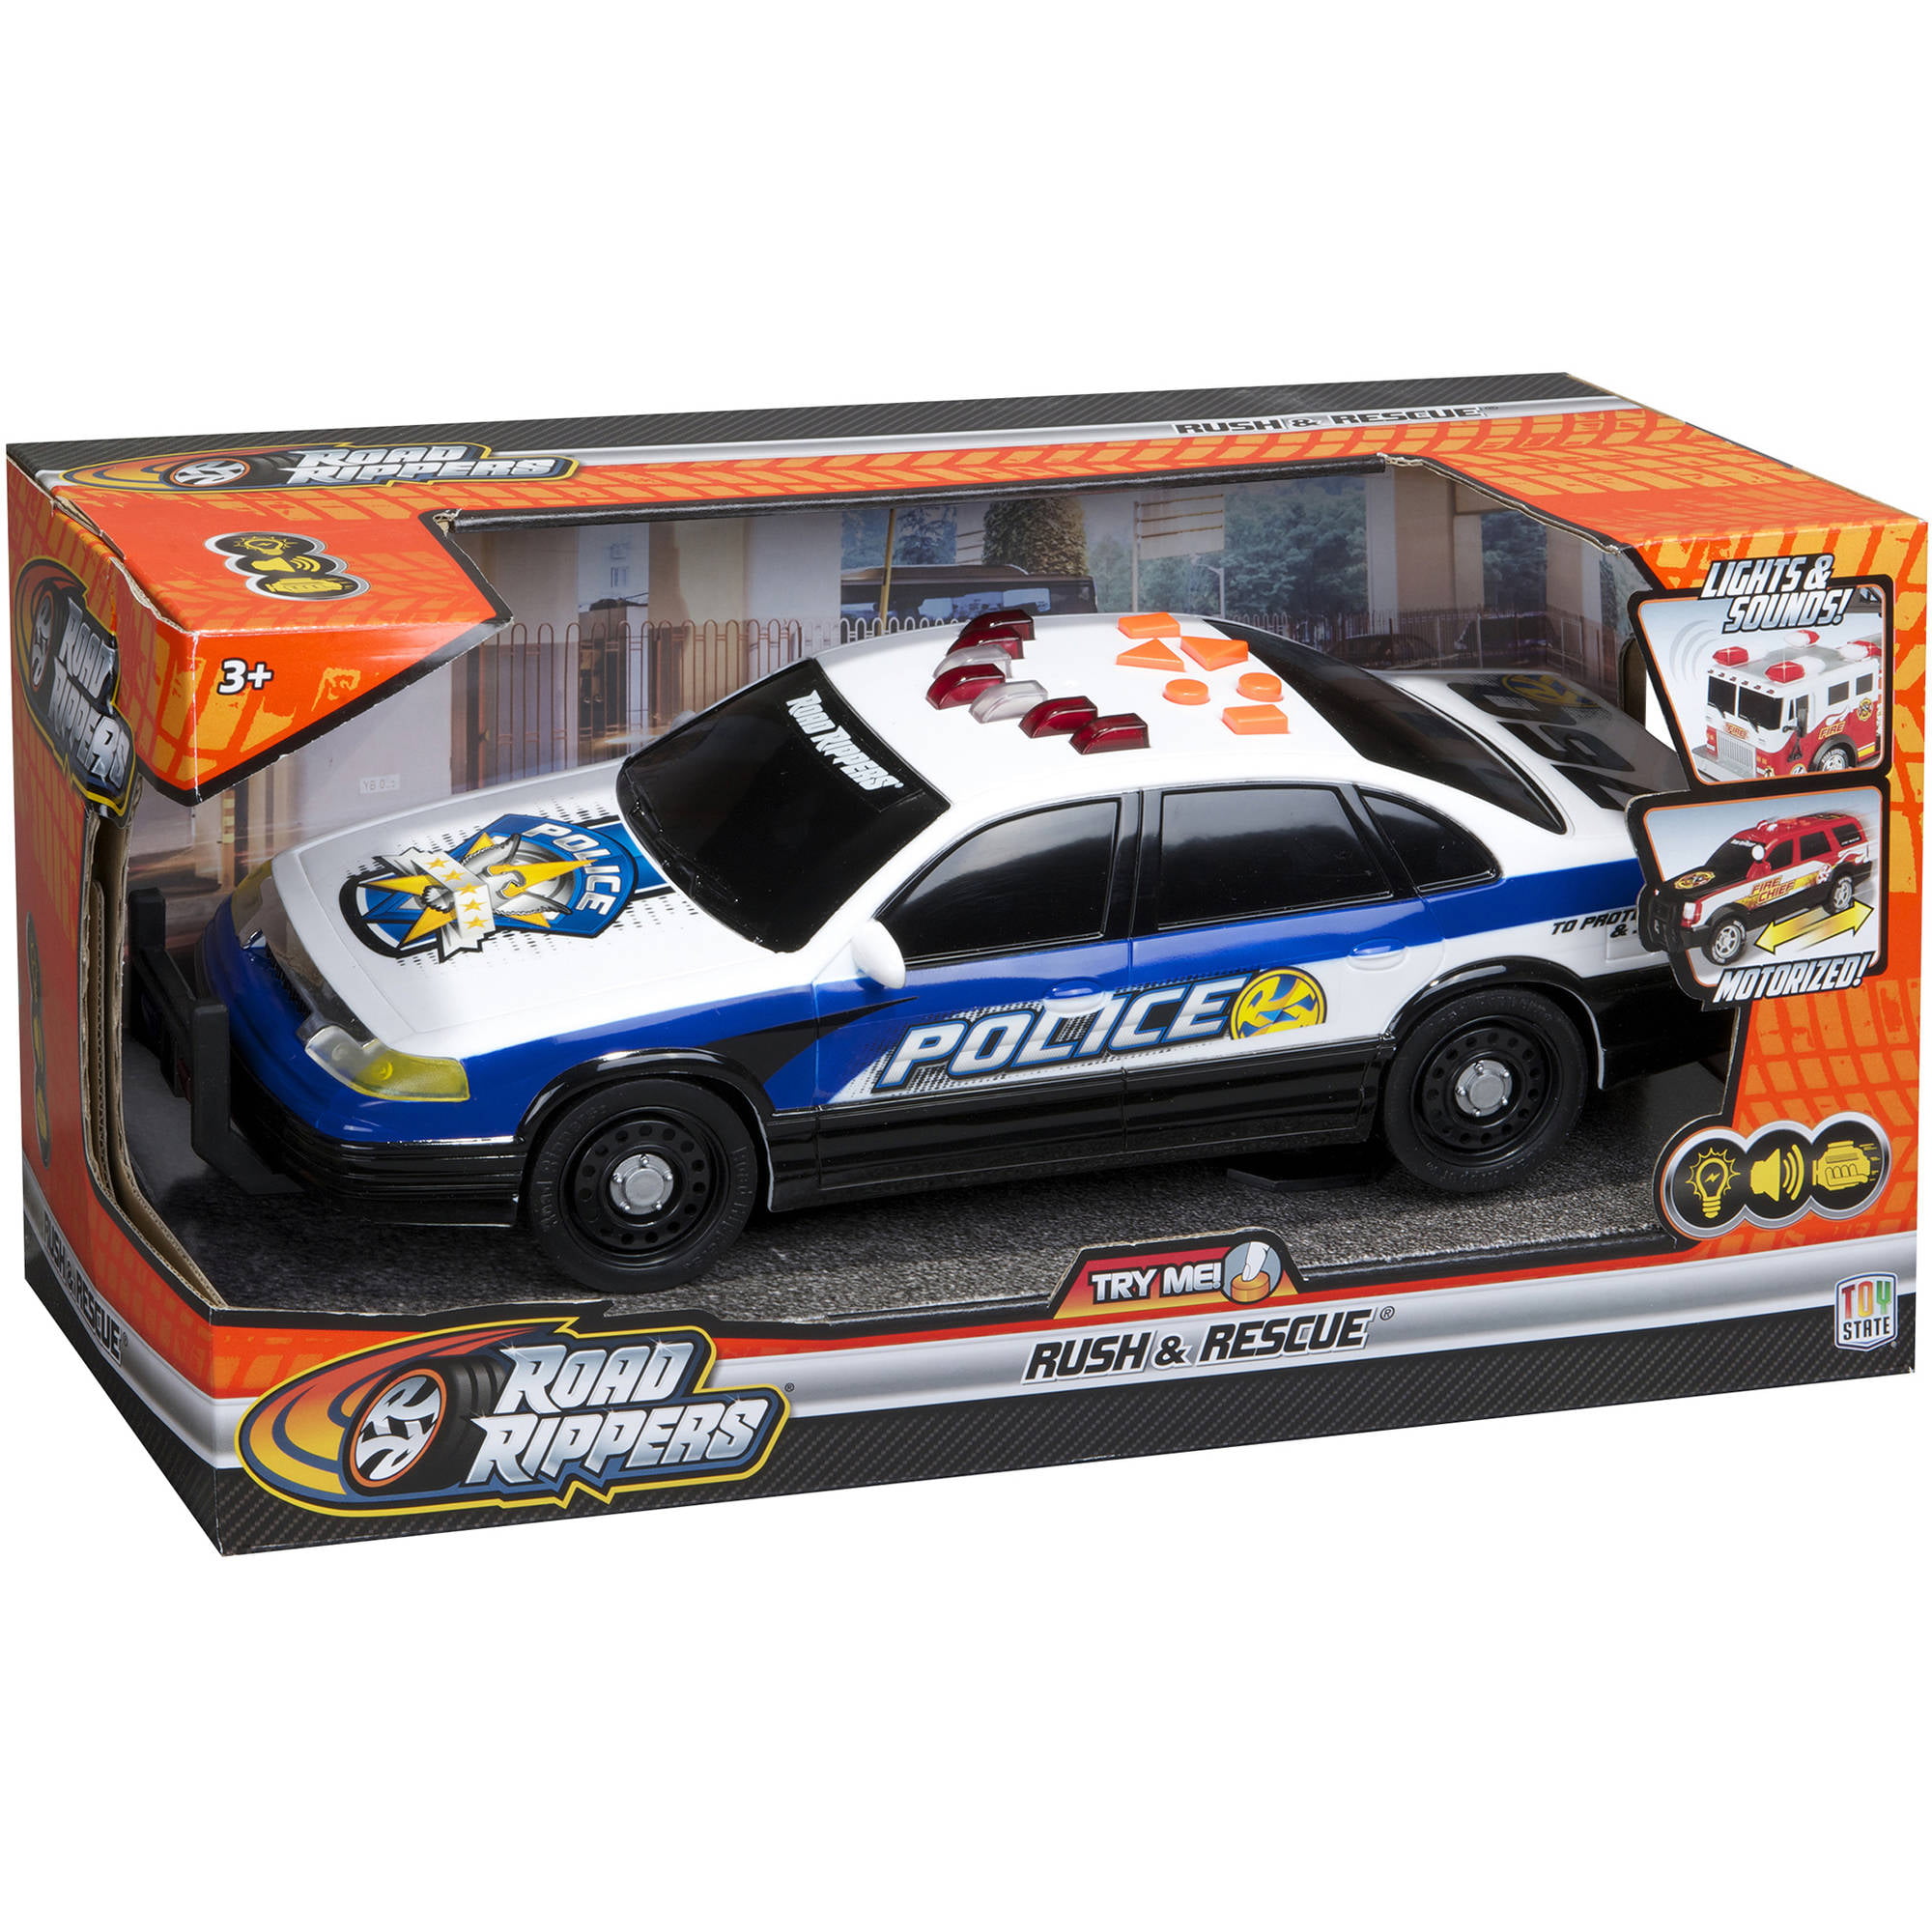 Road Rippers 14 Rush & Rescue Police Car